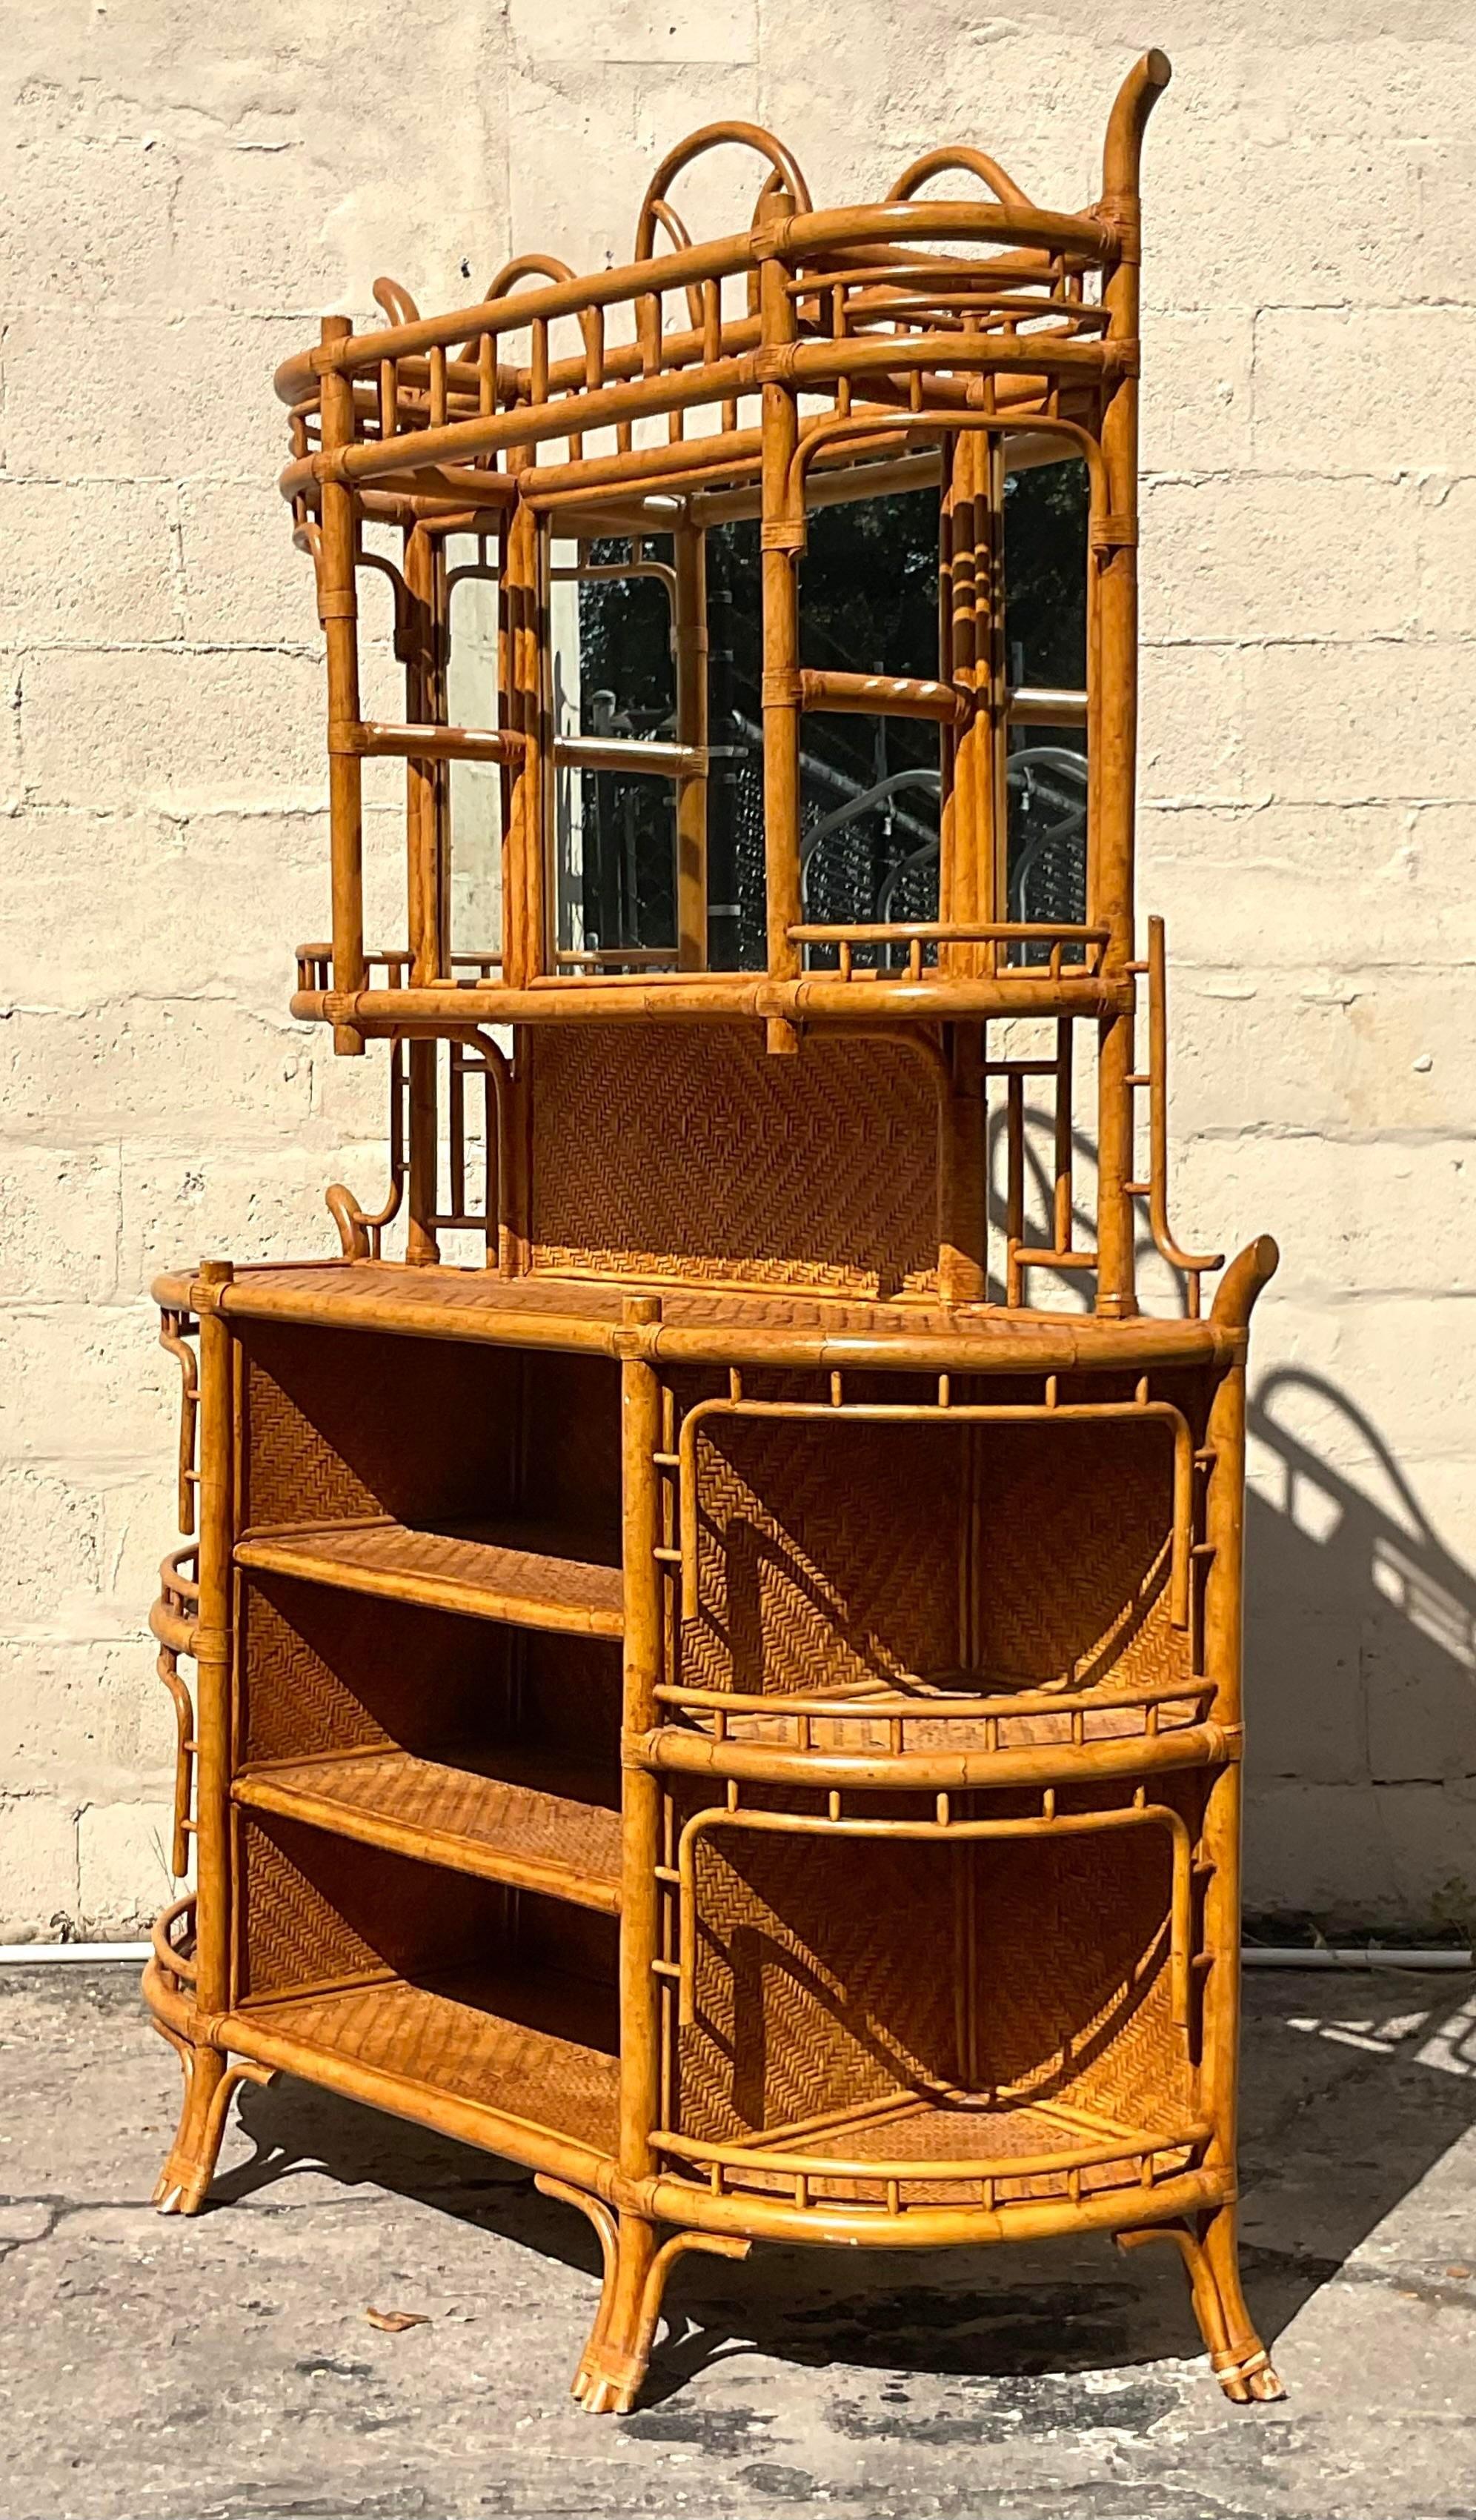 A stunning vintage Coastal dry bar. Gorgeous bent rattan with inset woven rattan panels. Gorgeous mirror hutch on top. Perfect as a dry bar, China hutch or orchid display. You decide! Acquired from a Palm Beach estate.